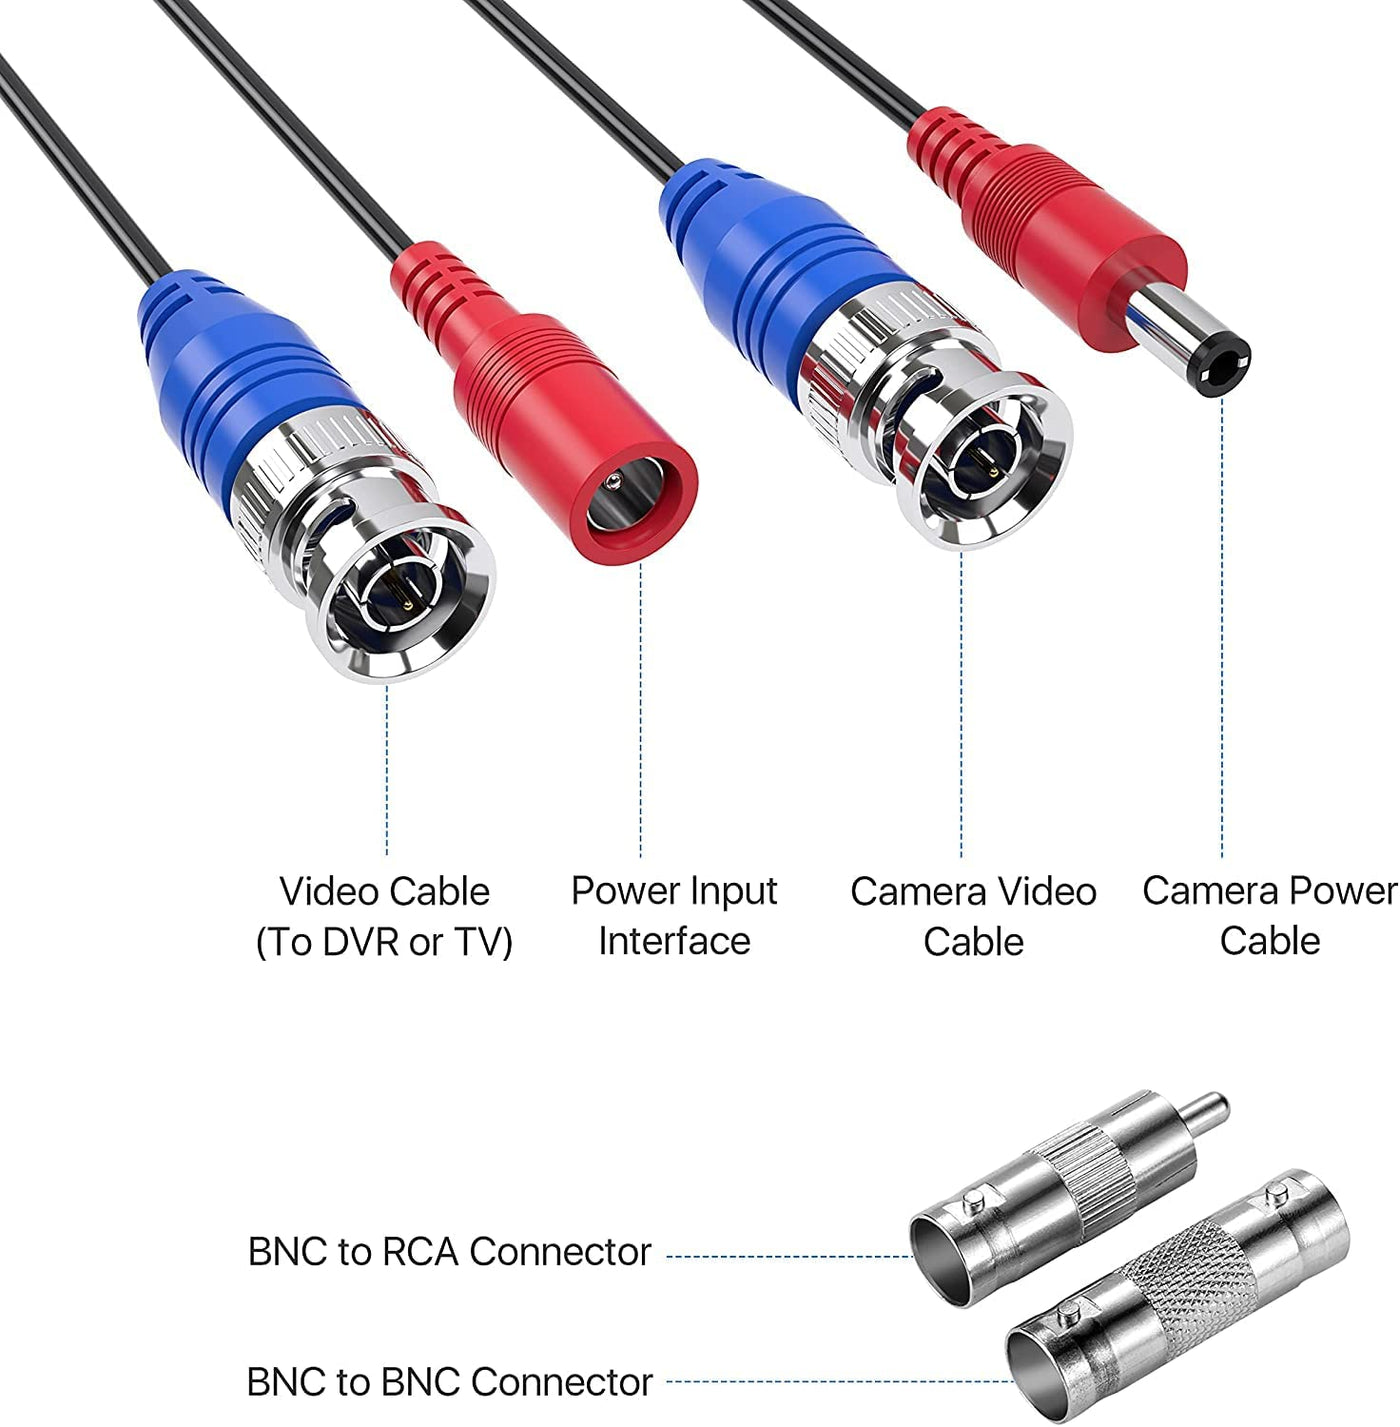 60Feet BNC Vedio Power Cable Pre-Made Al-in-One Camera Video BNC Cable Wire Cord for Surveillance CCTV Security System with Connectors(BNC Female and BNC to RCA)